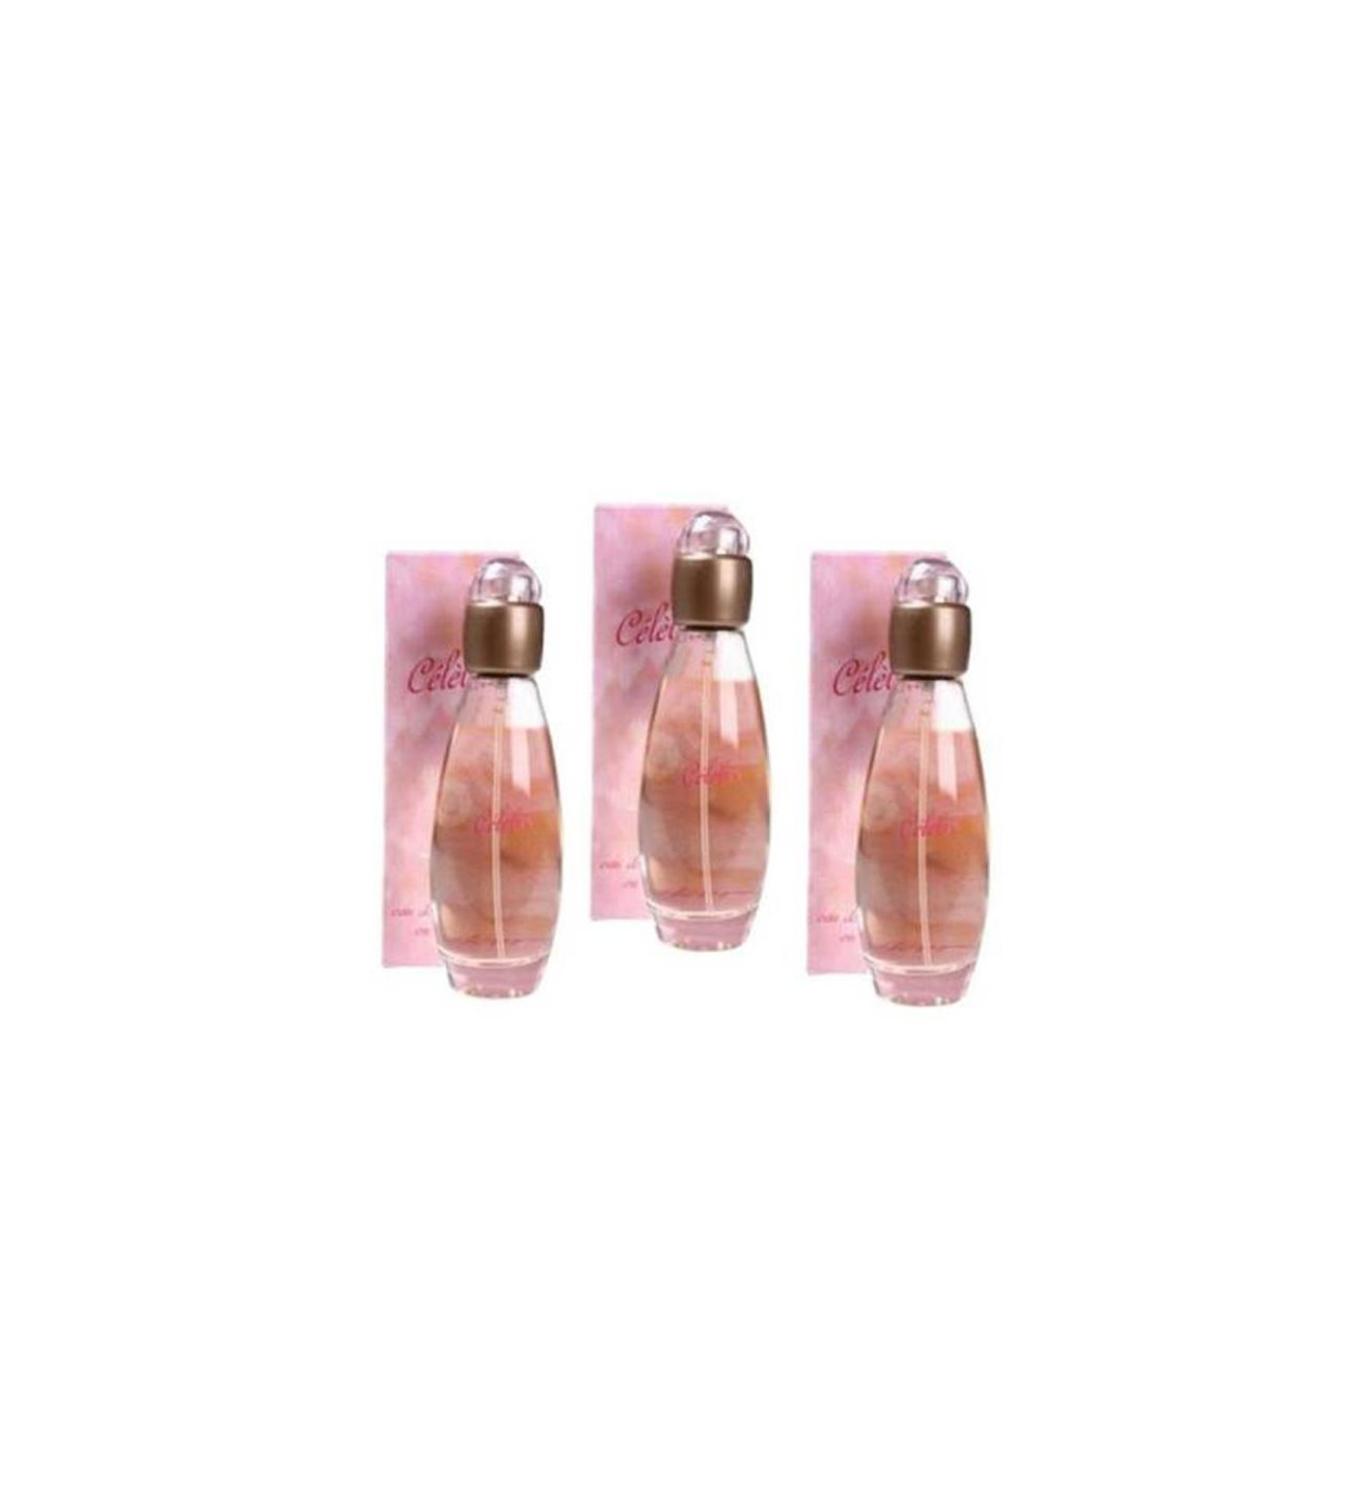 Celebre Women Perfume Edt 50 Ml. PCs set packet women attractive sexy pleasant perfume impressive permanent care for new year gift